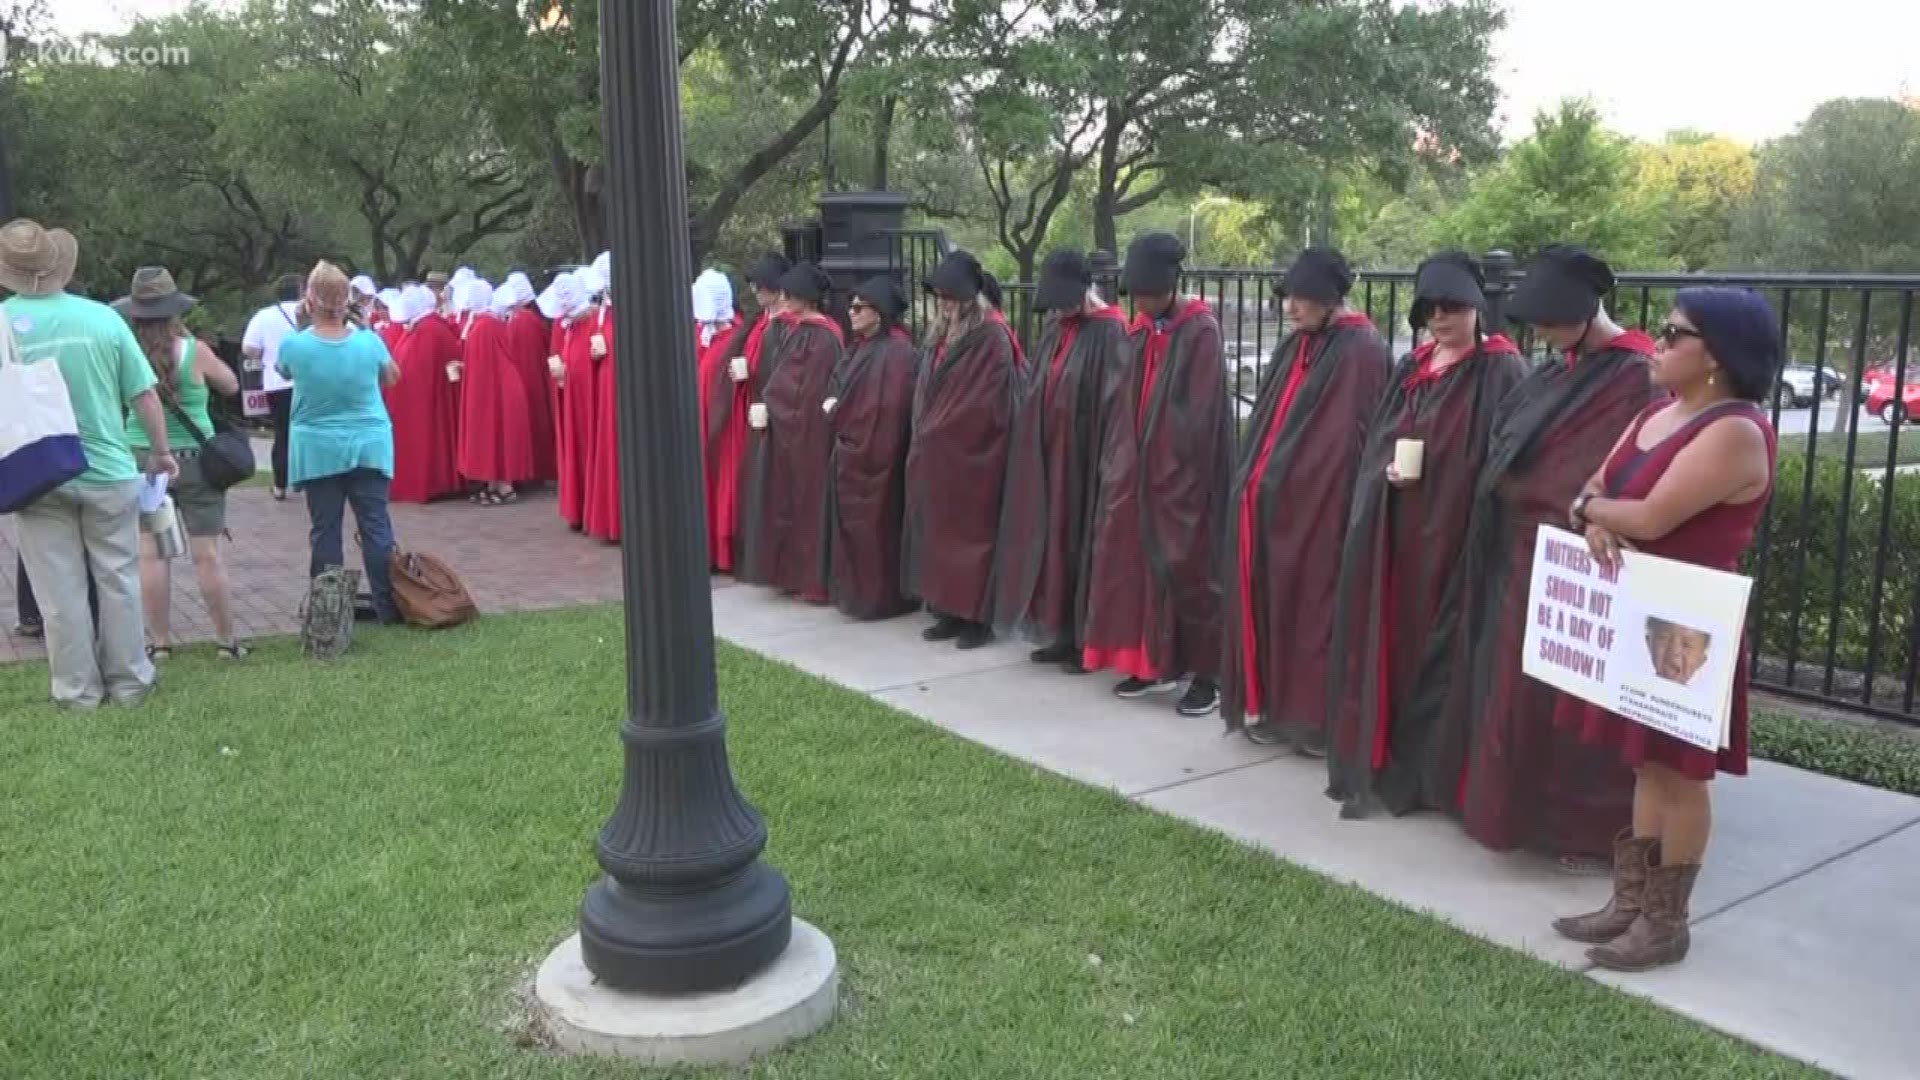 A group of women dressed as handmaids put on a protest at the Governor's Mansion to show opposition to Governor Abbott's inaction to the high maternal mortality rate in Texas.